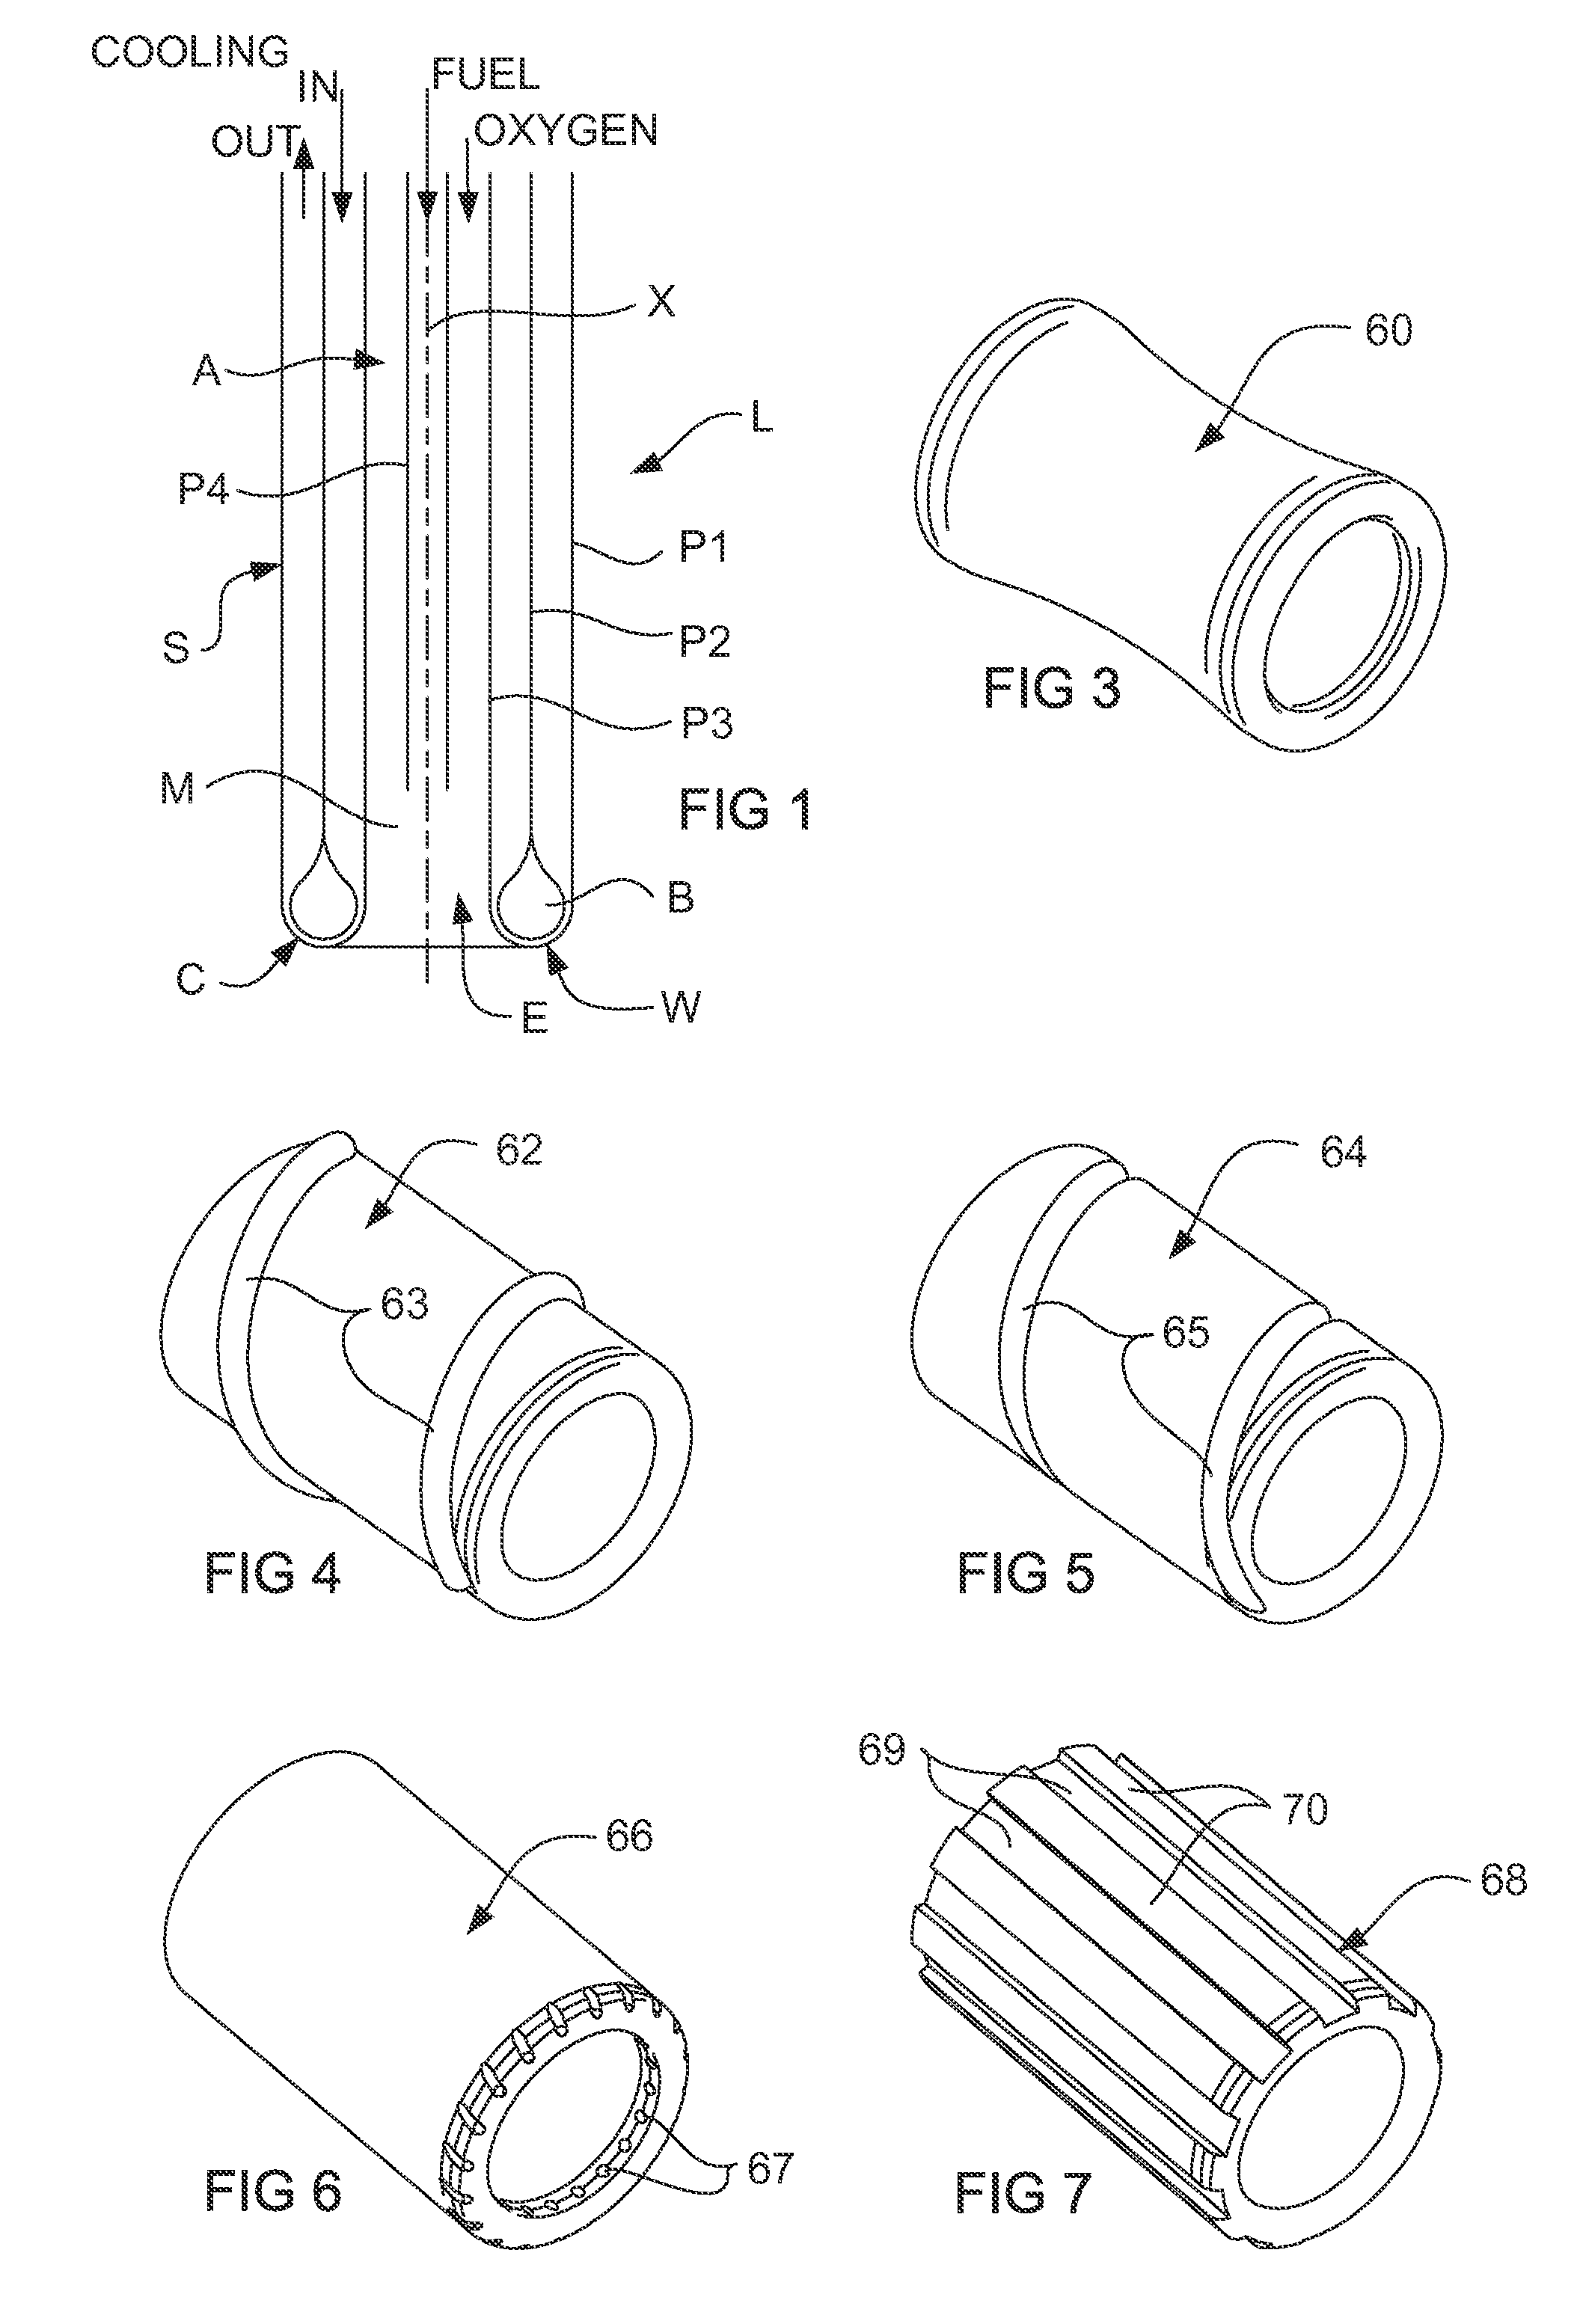 Fluid cooled lances for top submerged injection